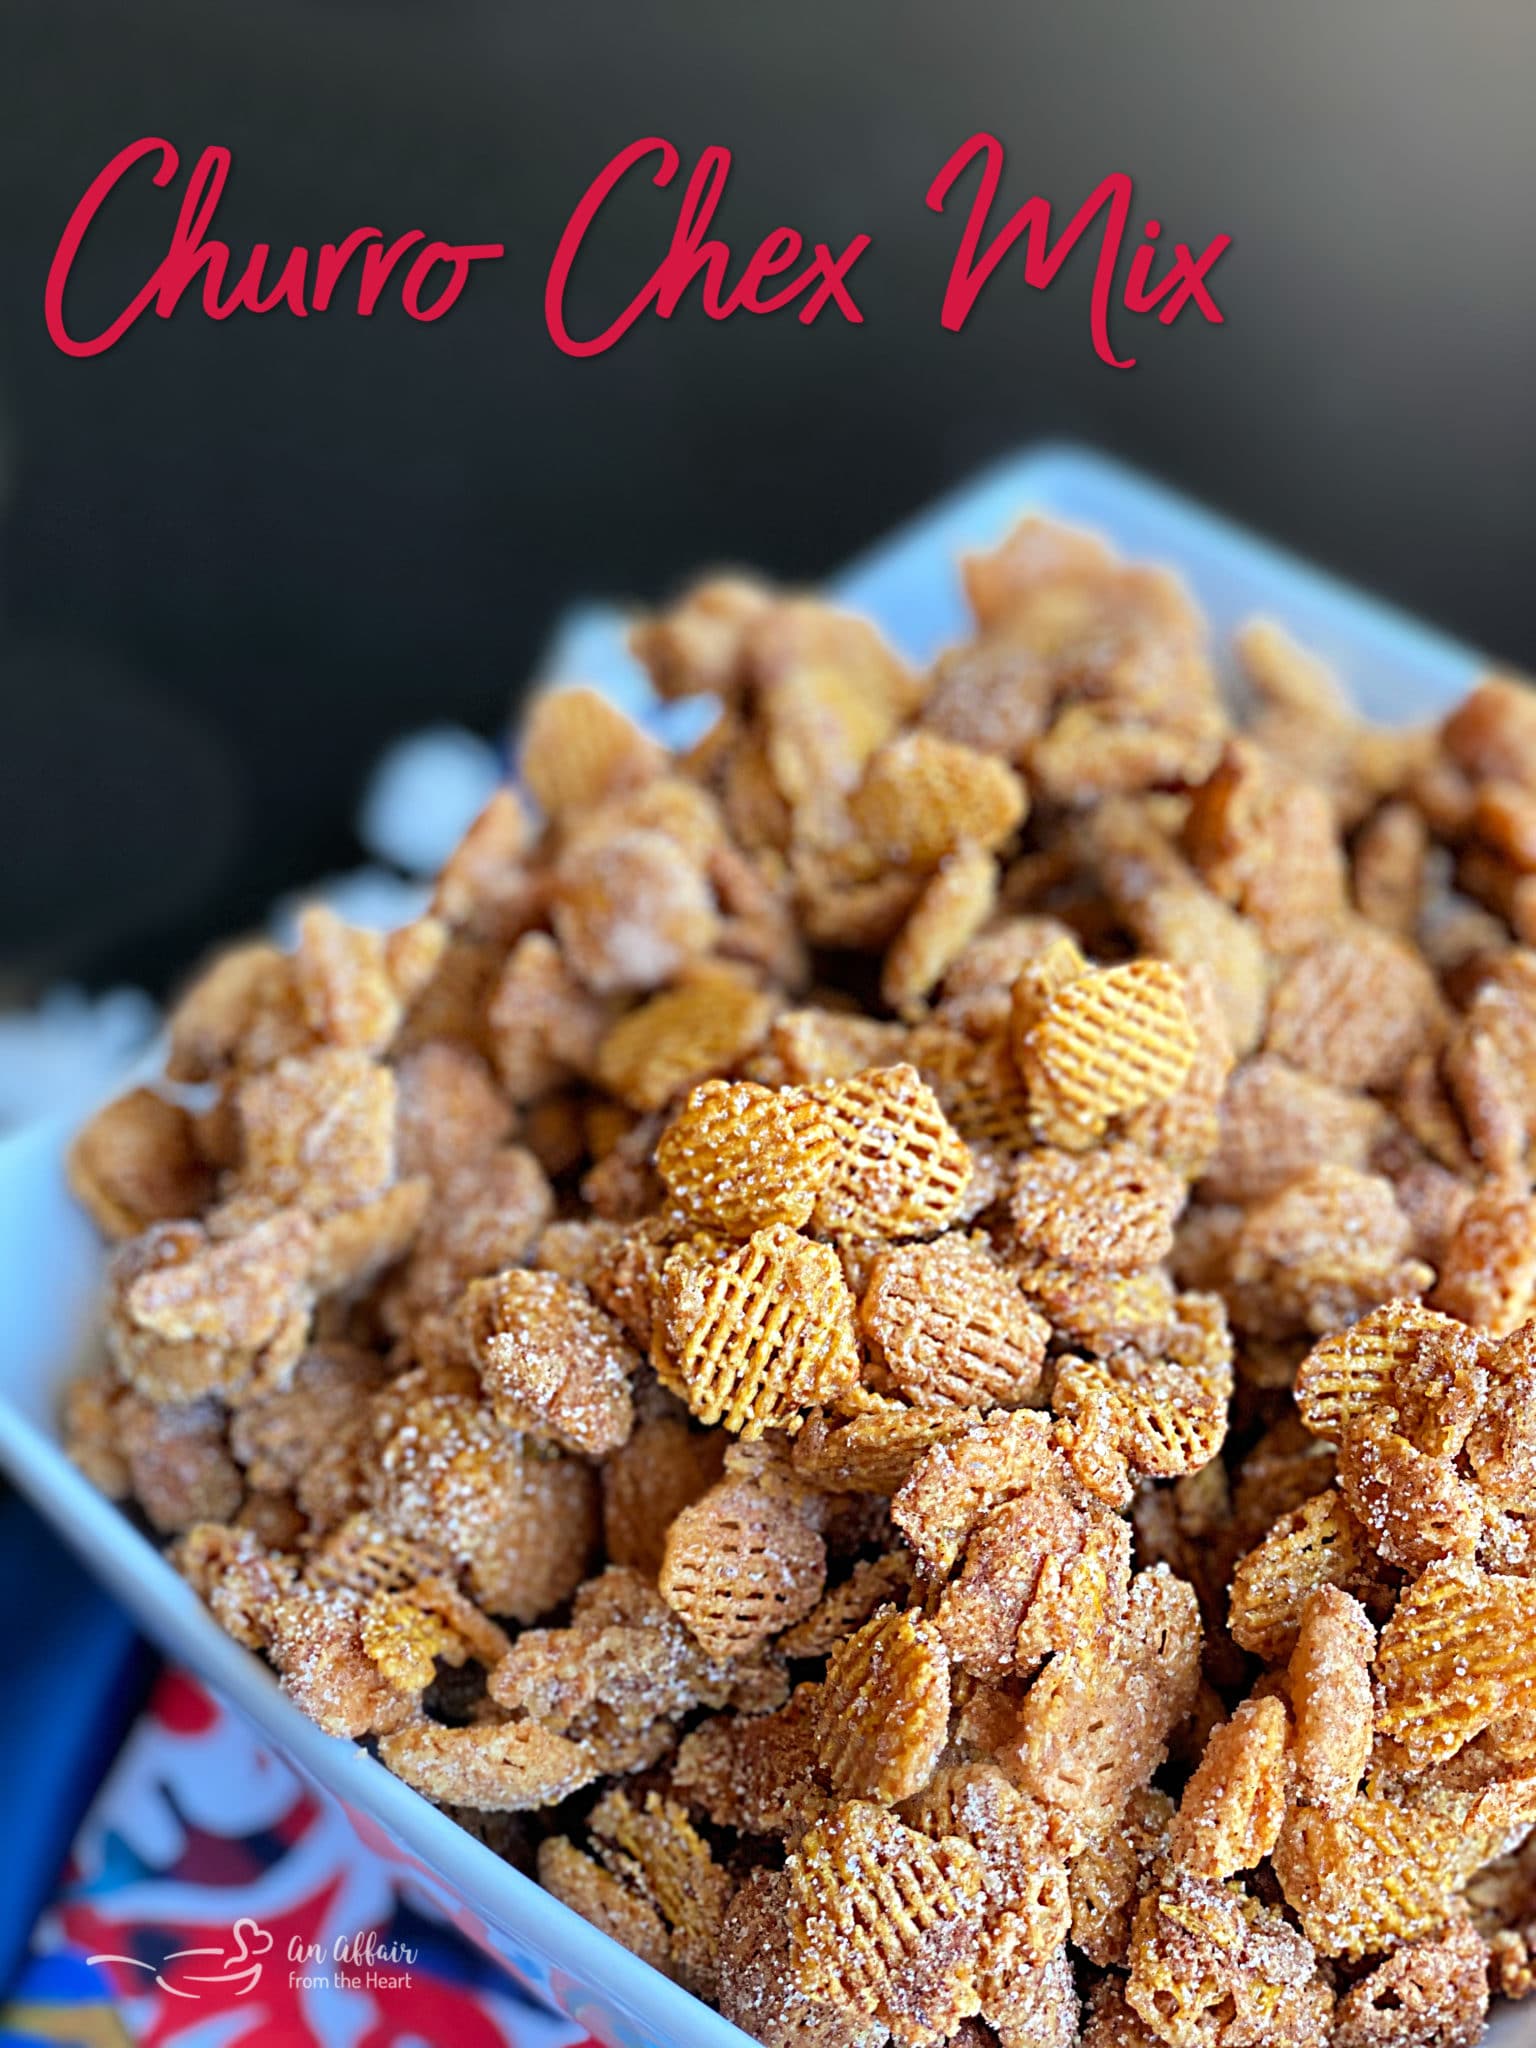 Caramel Churro Chex Mix-The Sweet Party Mix Your Life is Missing!